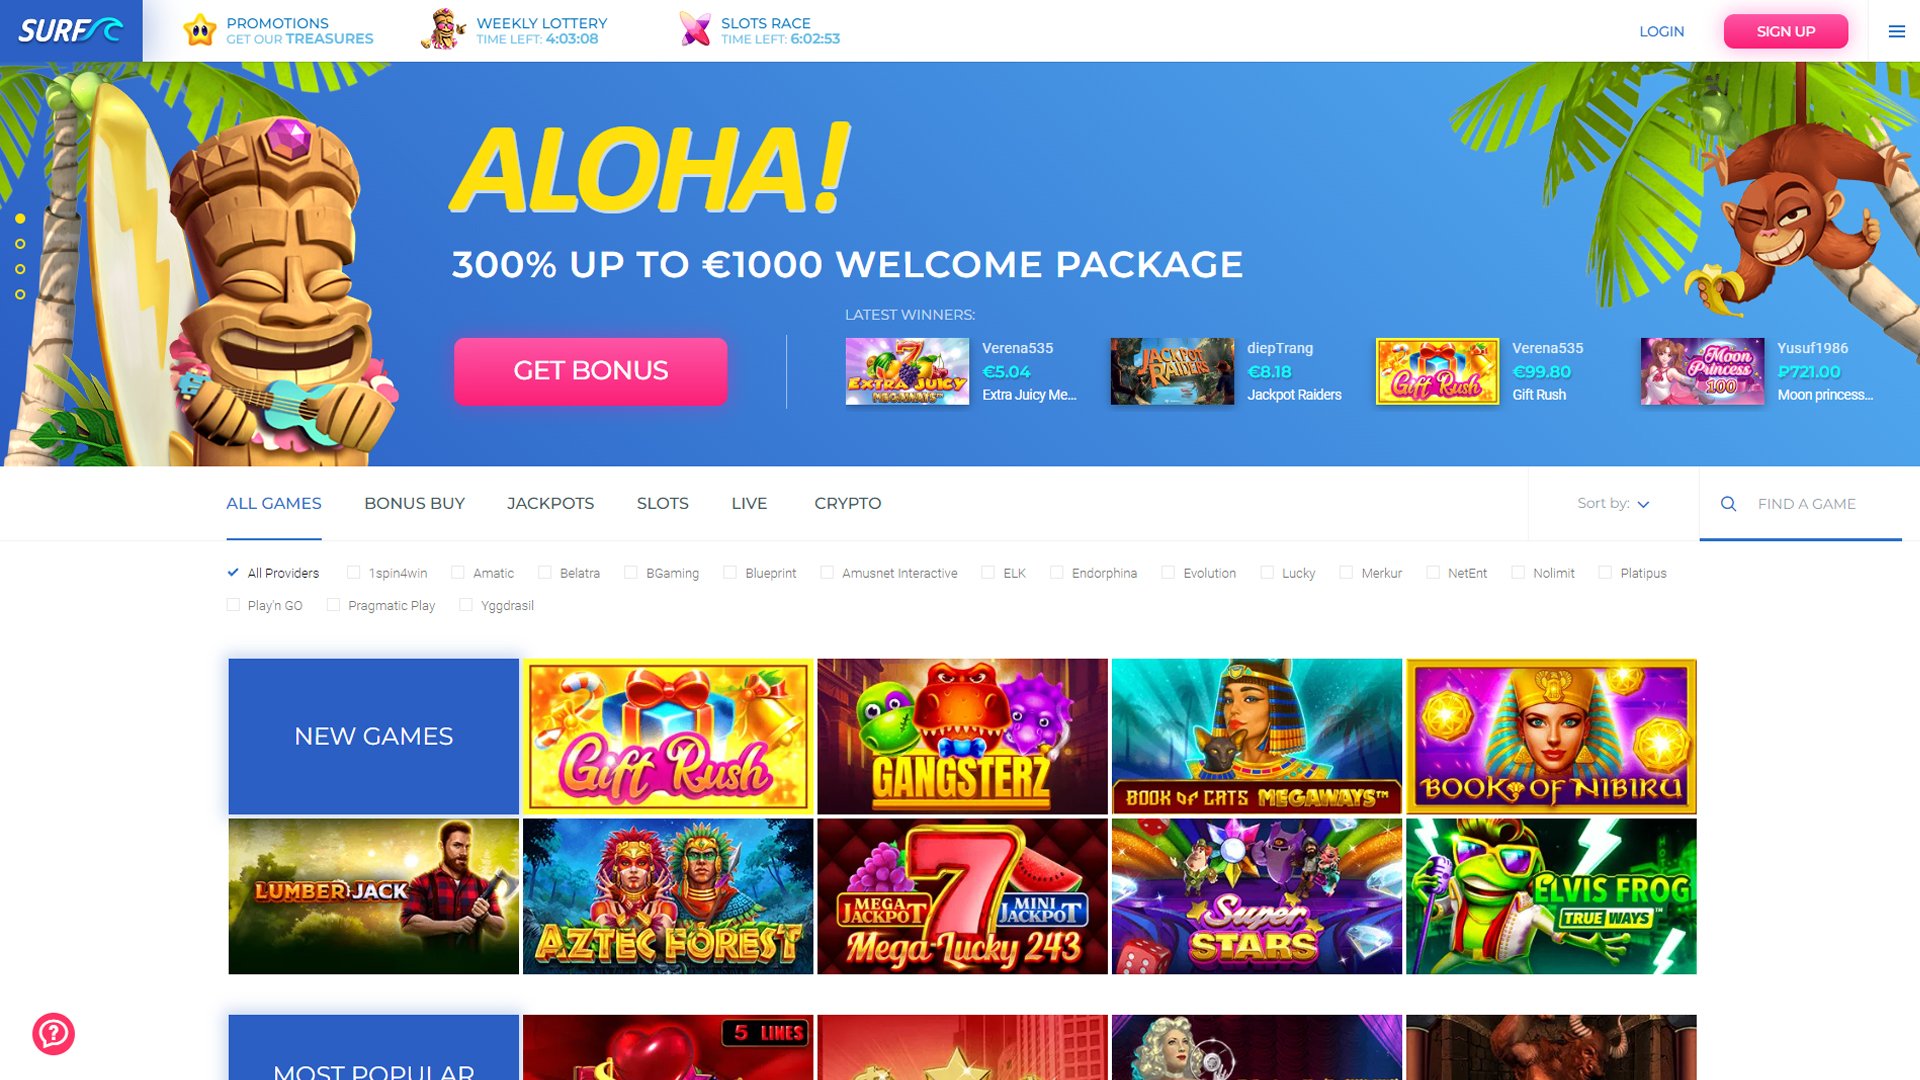 Surf Casino Home Page